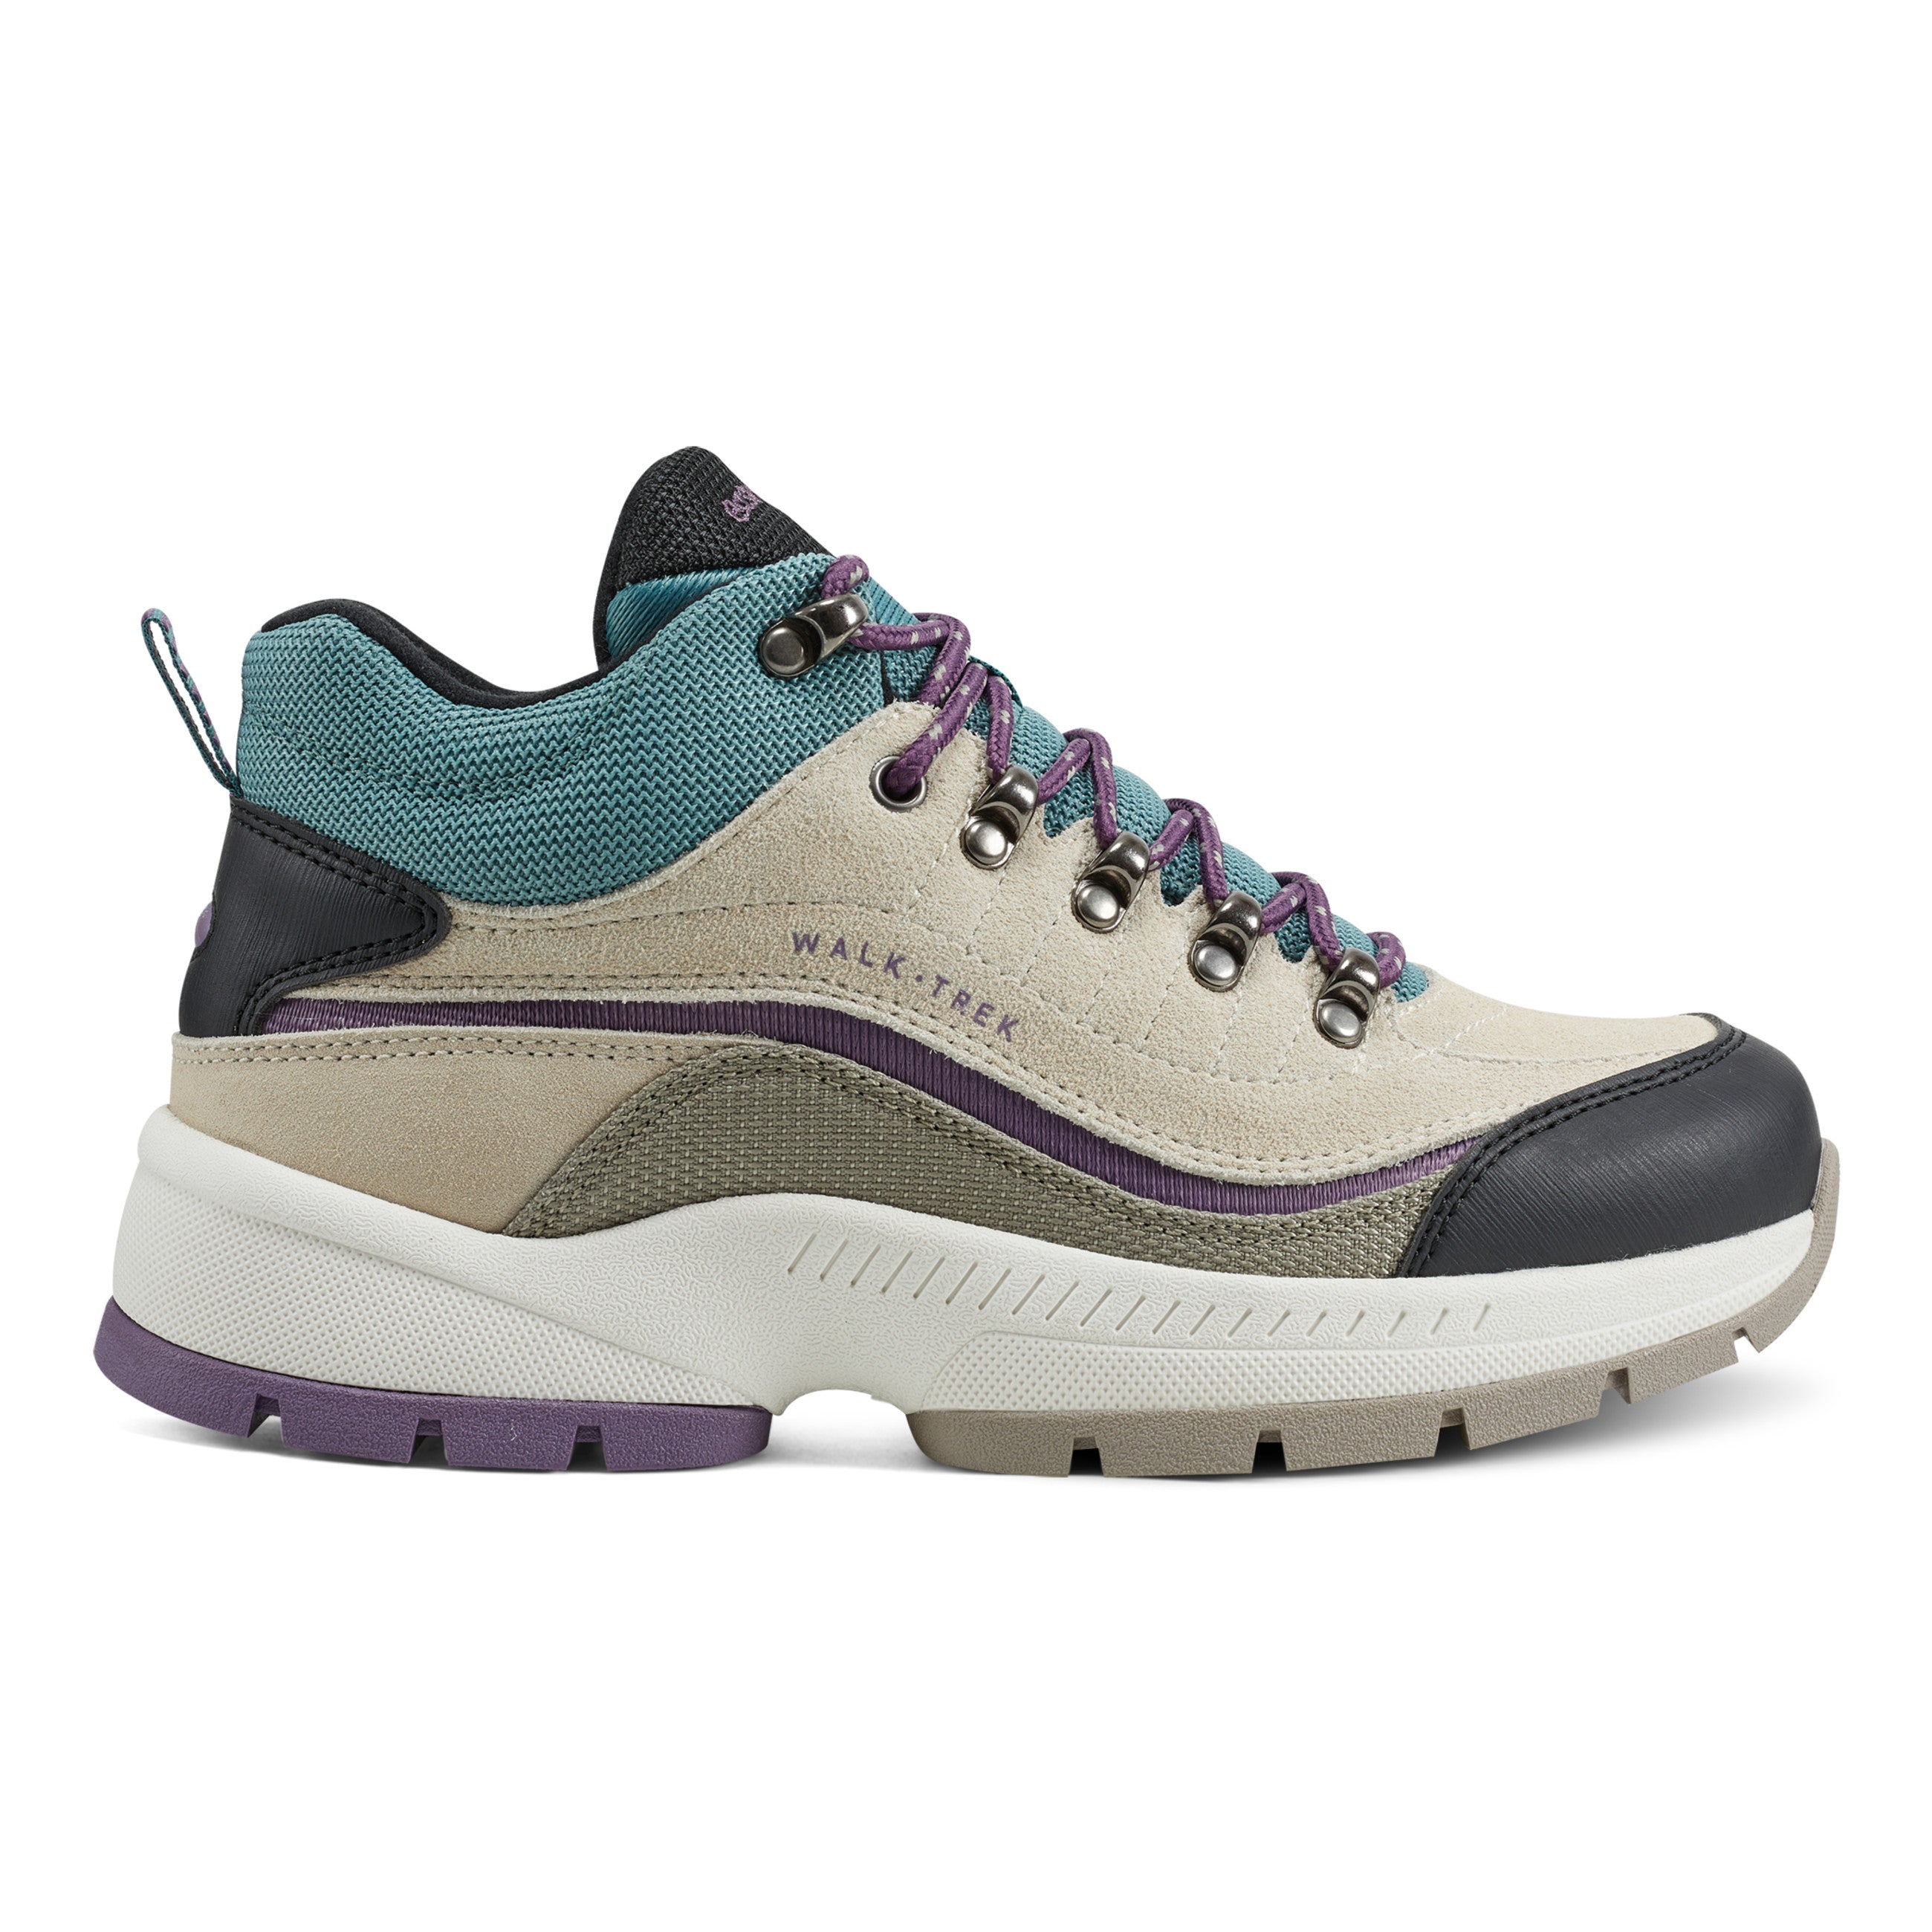 Romytrm Active Walking Shoes